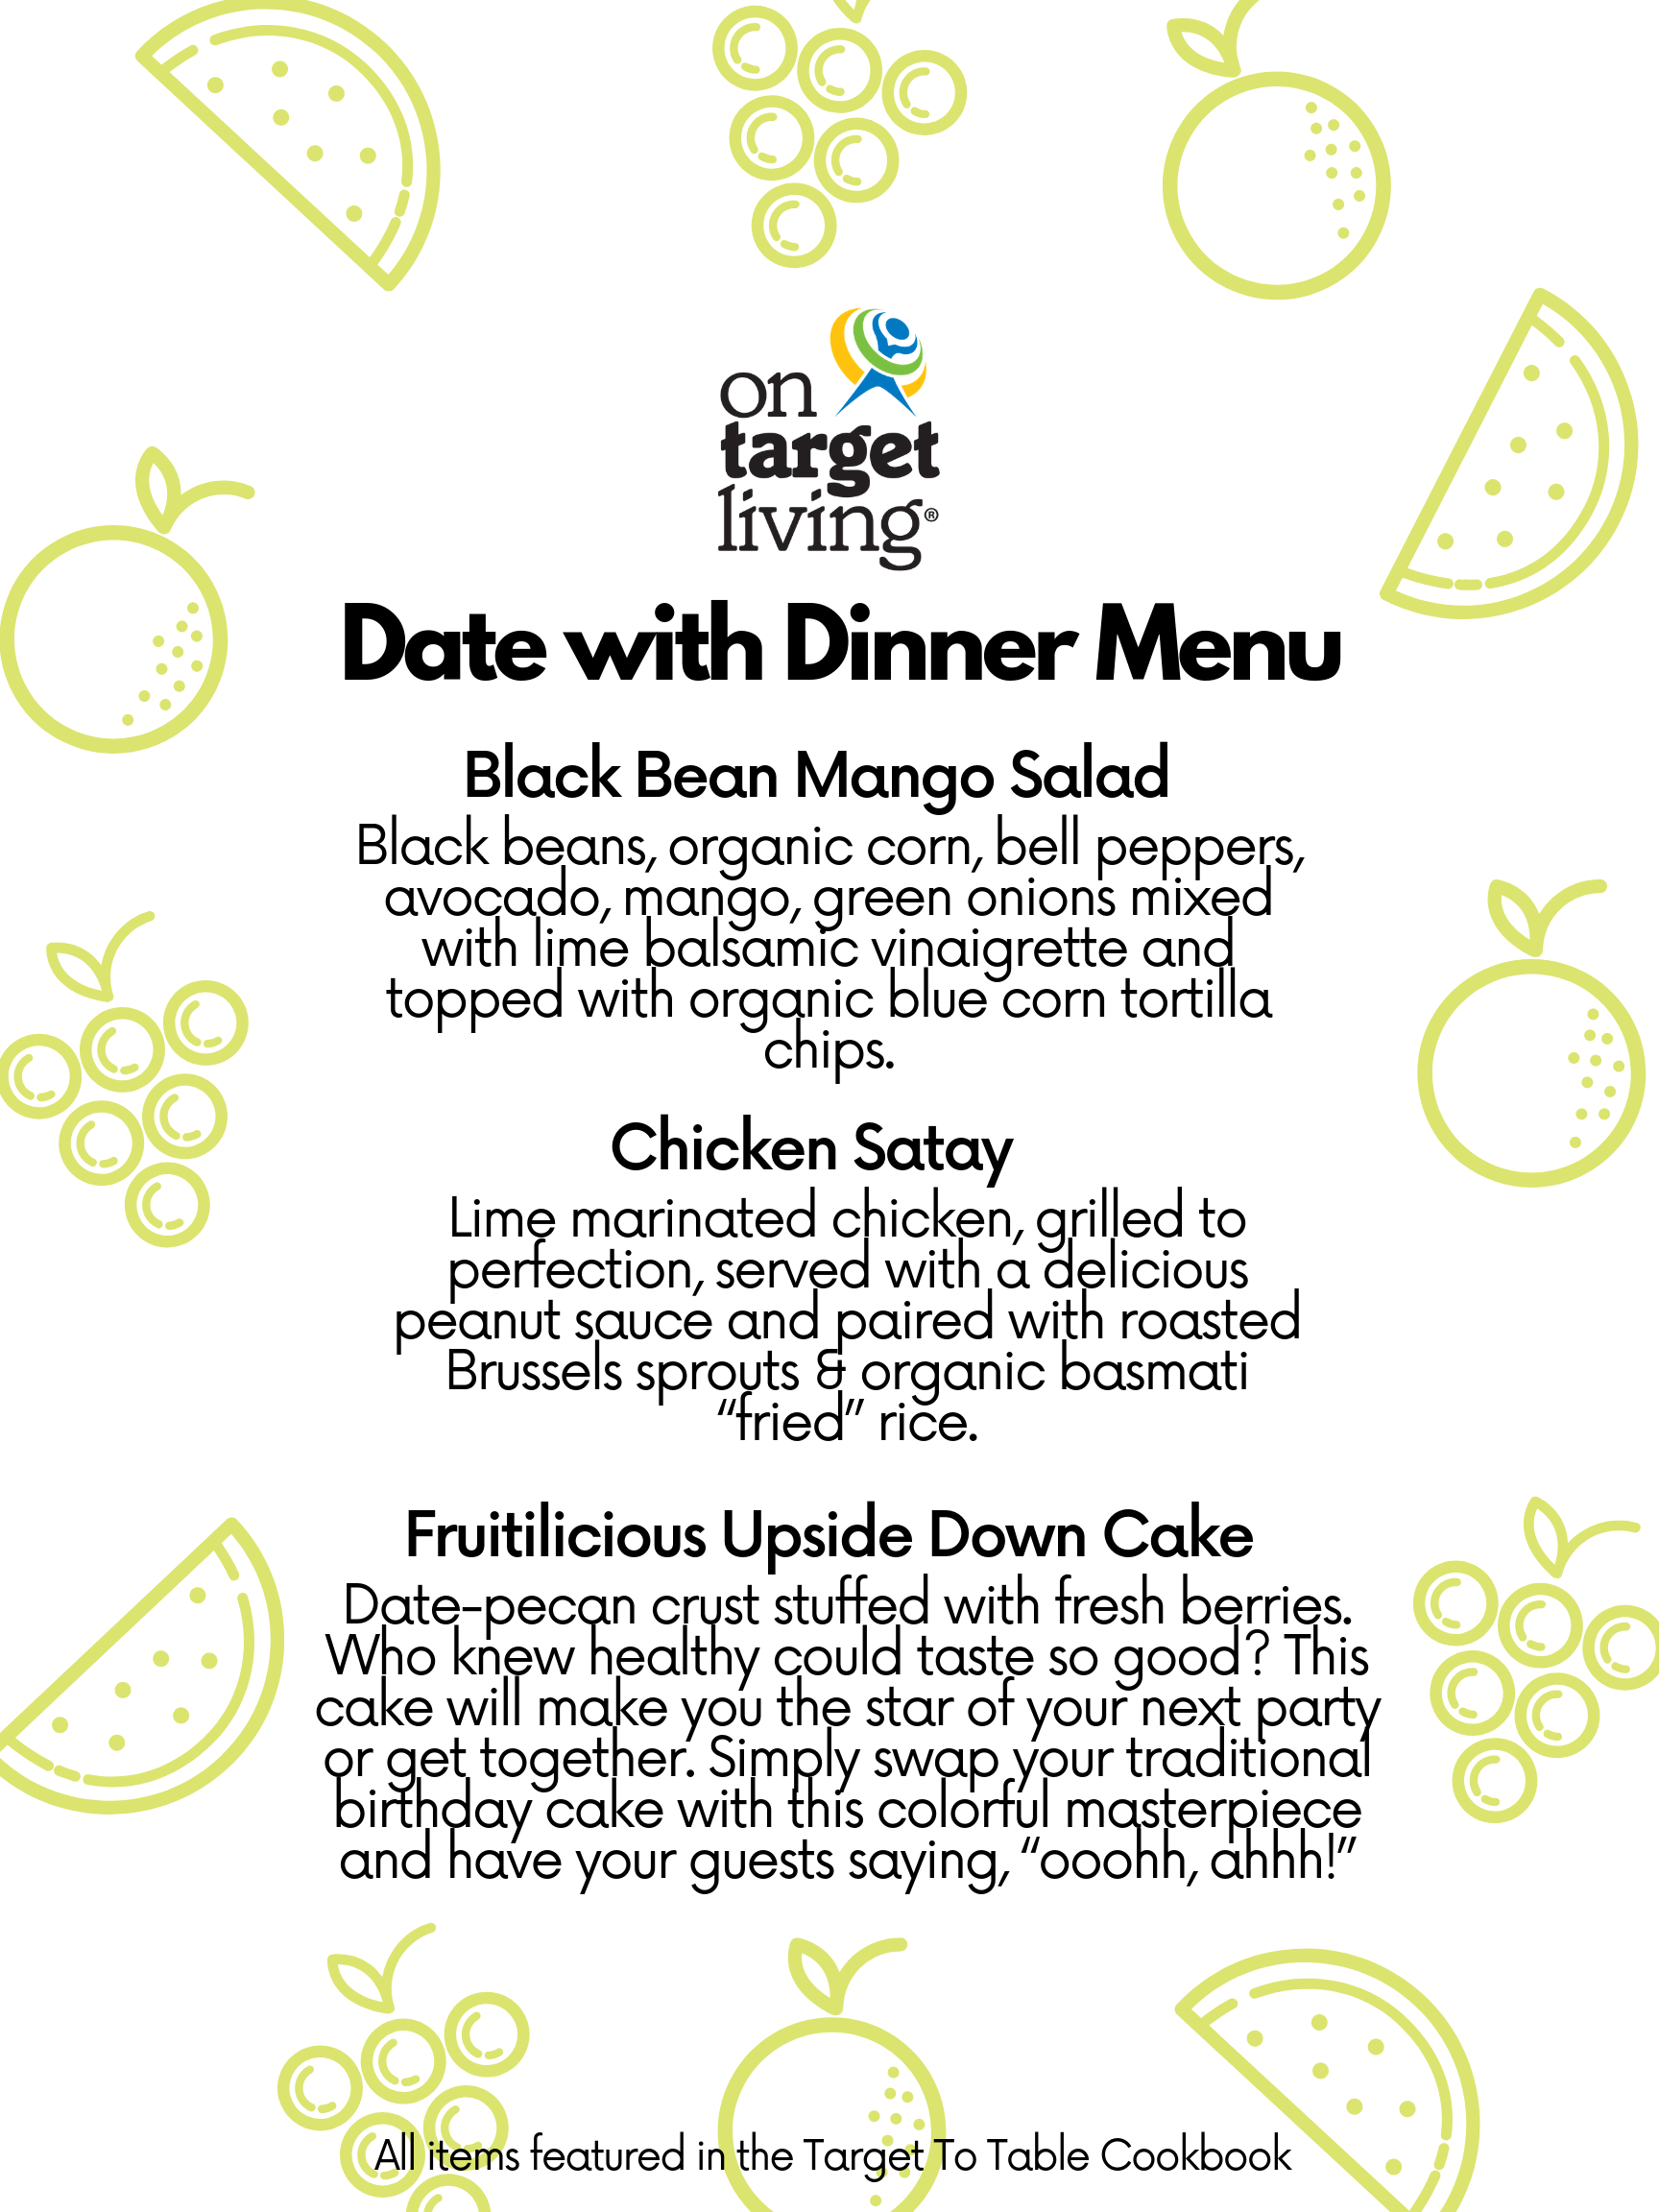 Date with Dinner Menu